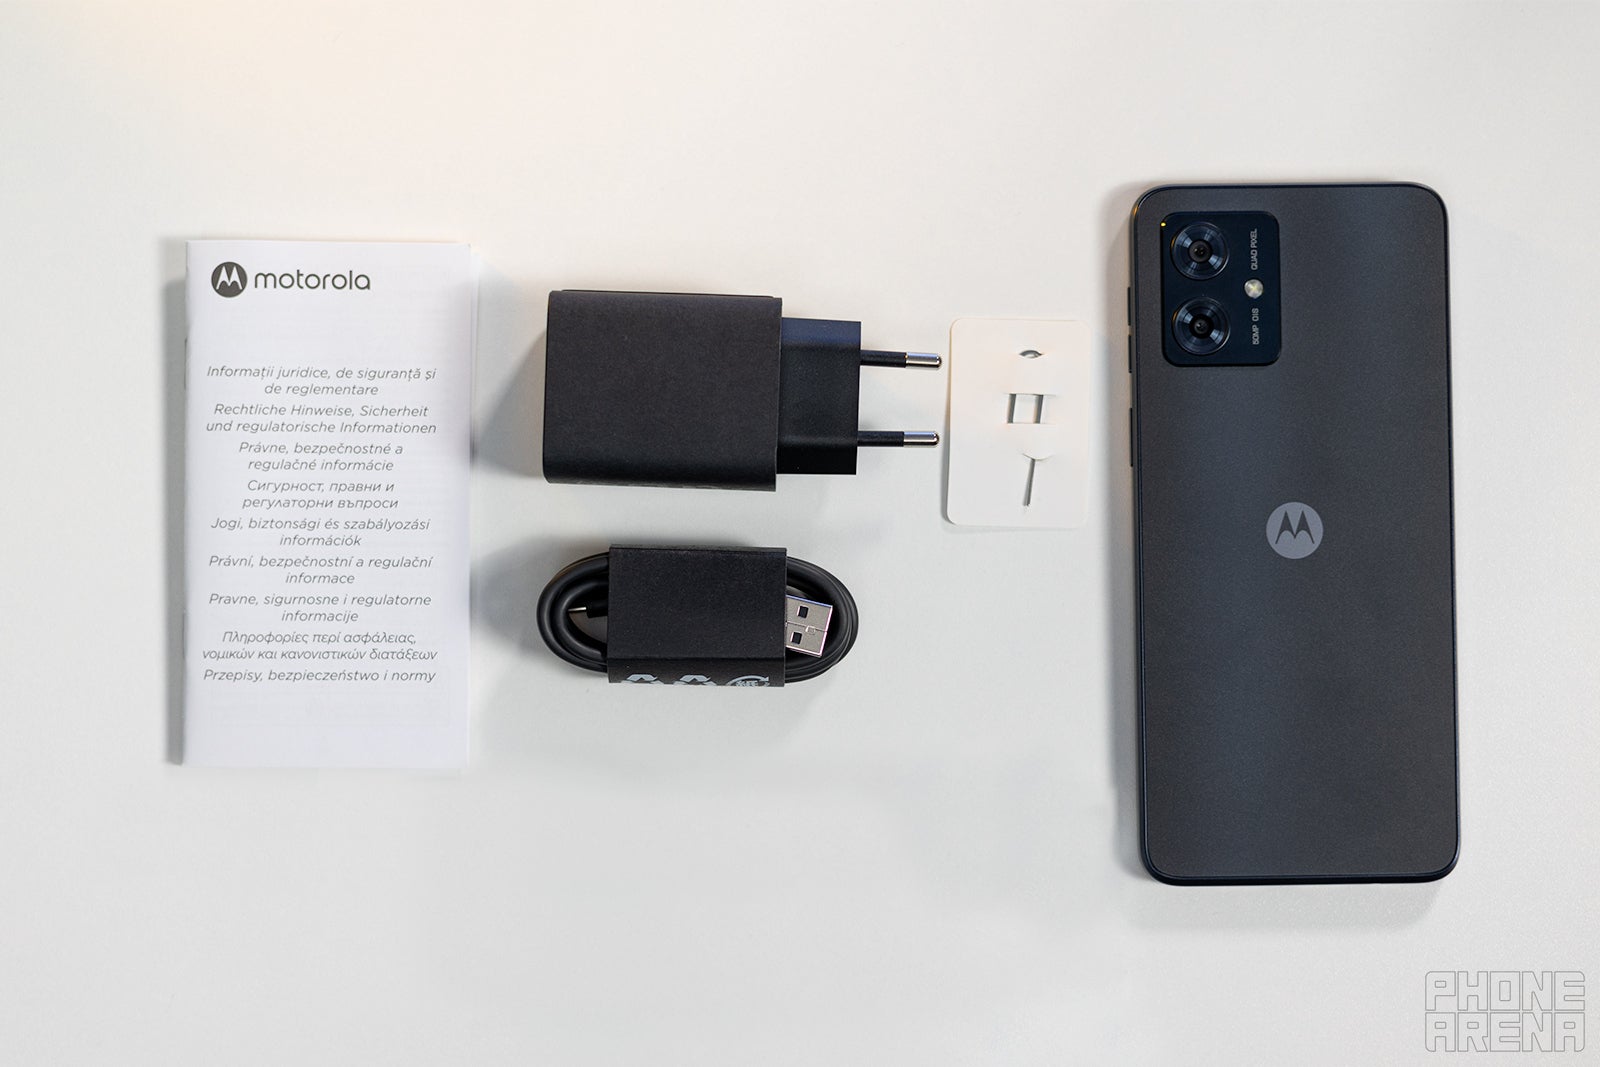 Moto G73 5G: Unboxing & First Look 